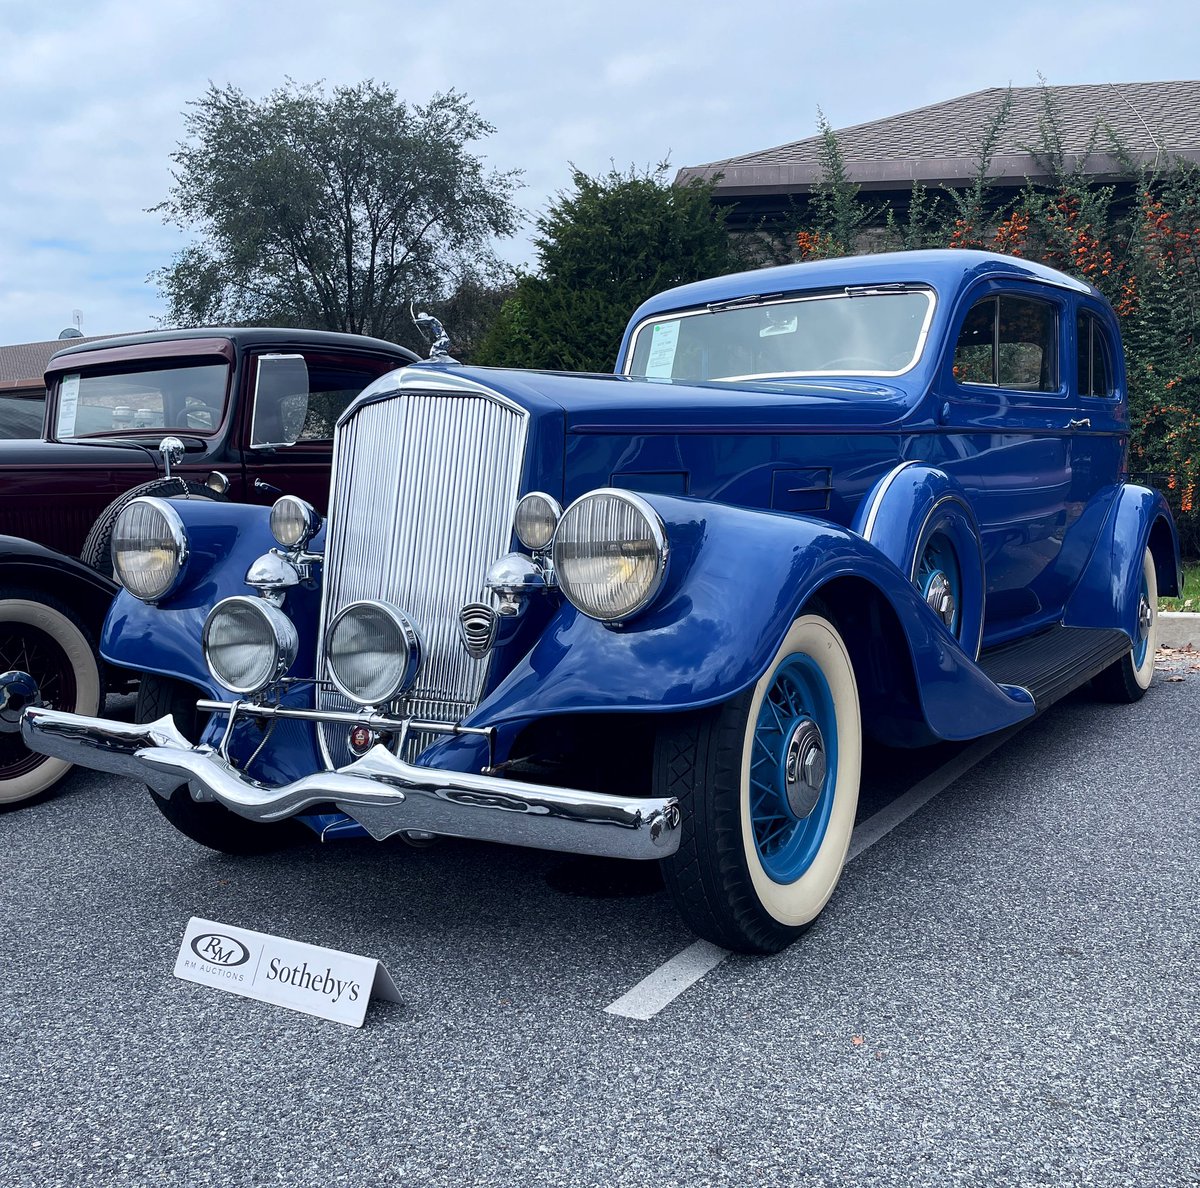 For the full post click here: instagram.com/am_media_ny/p/…

This is the quite rare, and special 1934 Pierce-Arrow Model 840A Brougham, finished in ‘French Blue’ with light blue accents and a tan interior. 

#Classiccar #classiccars #classics #piercearrow #piercearrow840a #ammediany